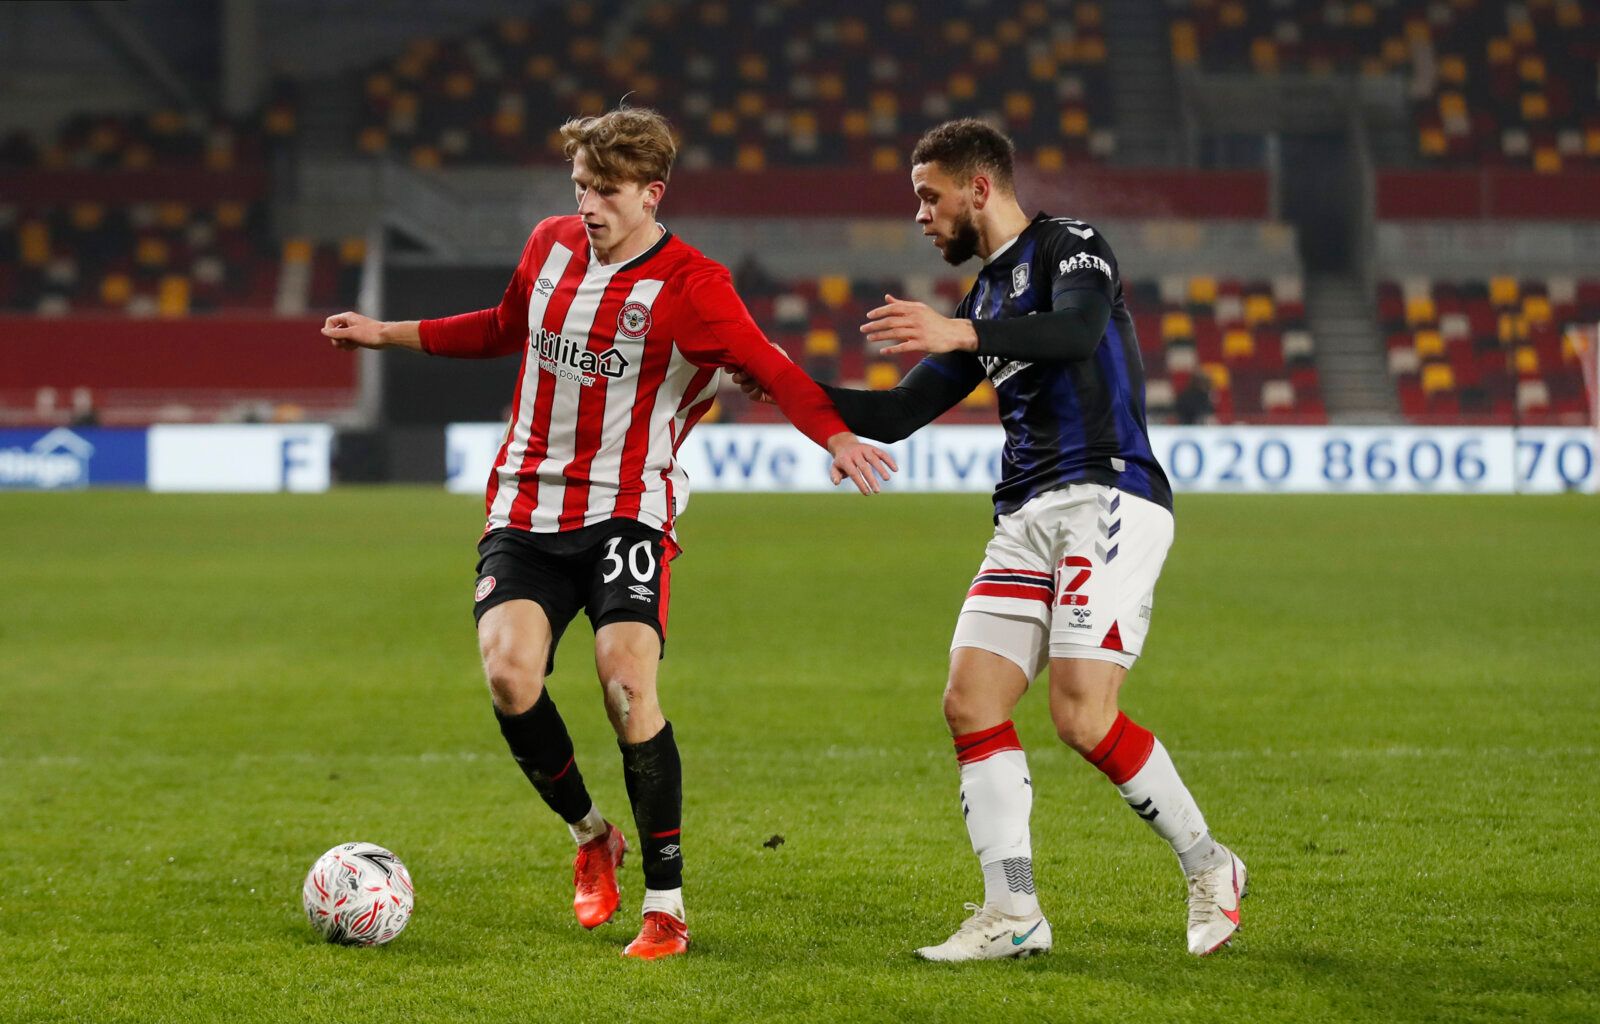 Soccer Football - FA Cup - Third Round - Brentford v Middlesbrough - Brentford Community Stadium, London, Britain - January 9, 2021  Brentford's Mads Roerslev in action with Middlesbrough's Marcus Browne Action Images via Reuters/Matthew Childs